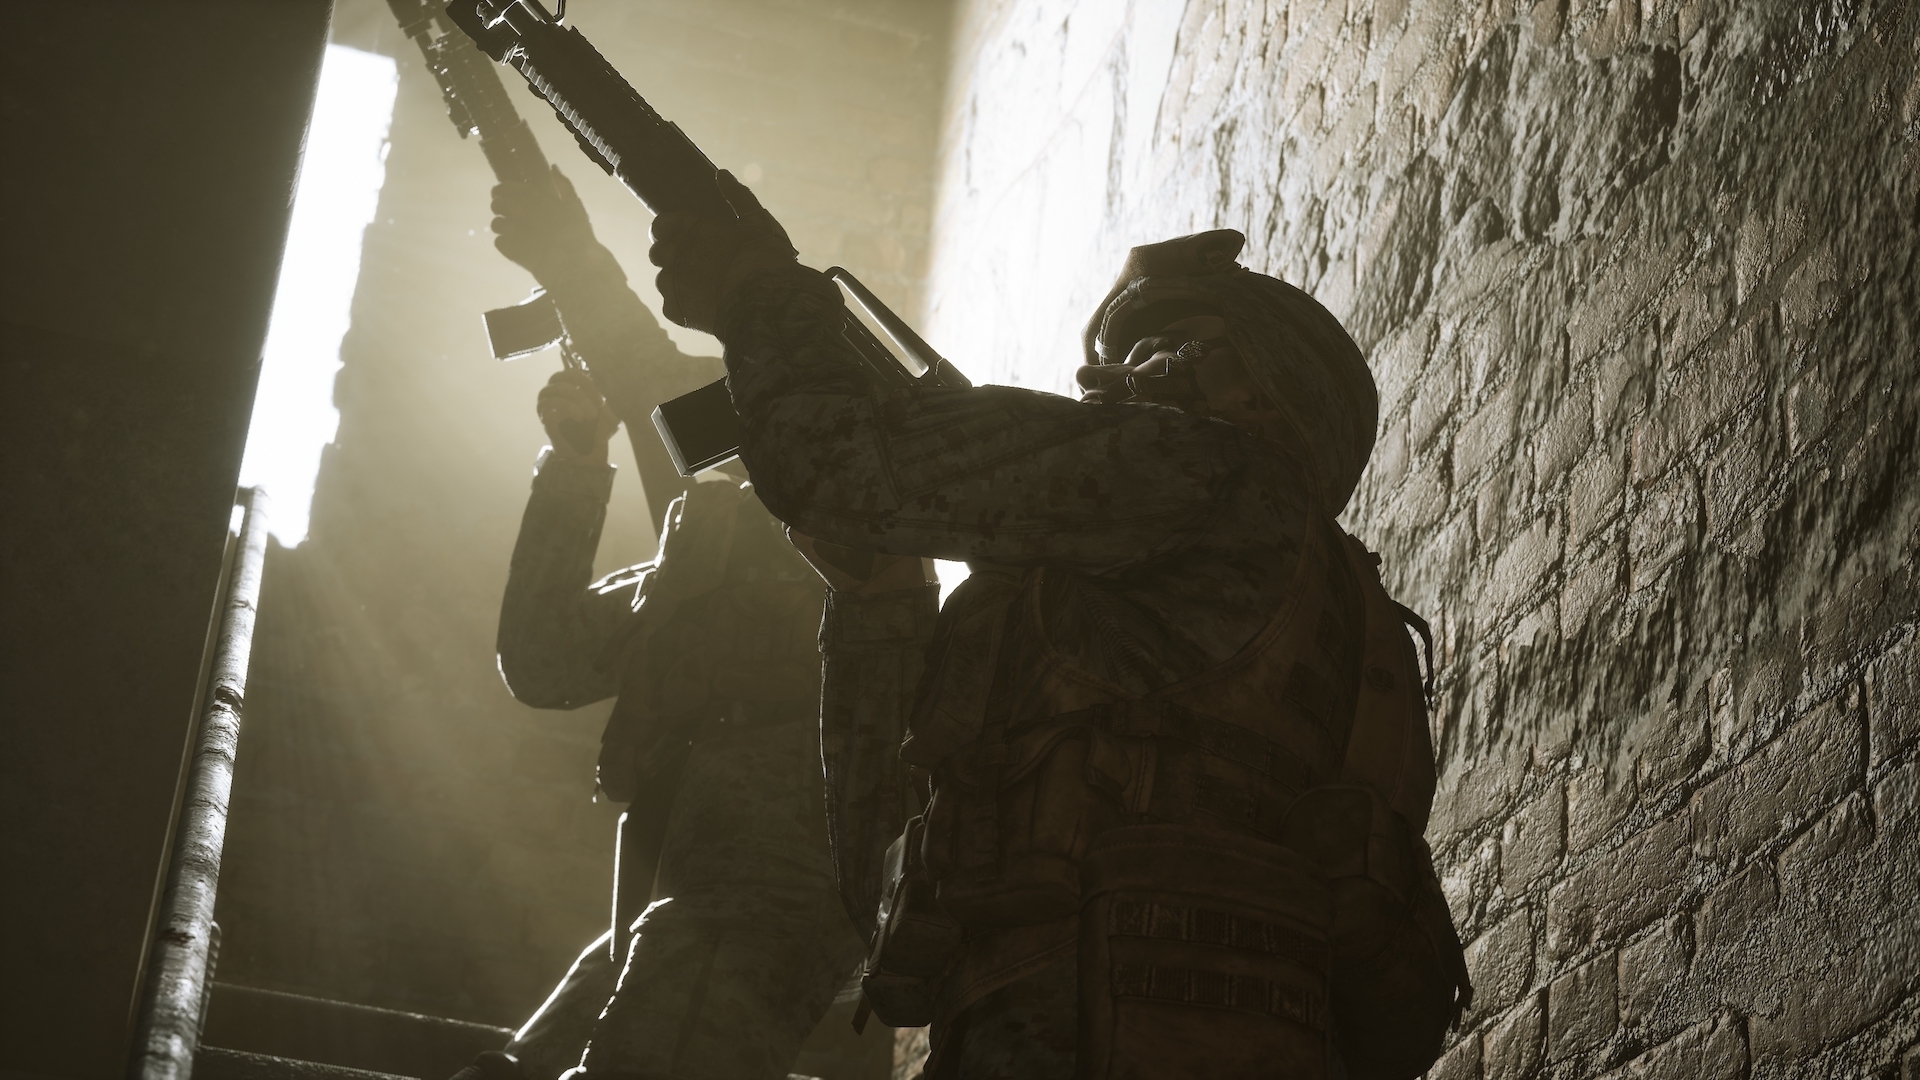 Gameplay screenshot of a US soldier advancing up a flight of stairs during a tactical raid with his rifle raised